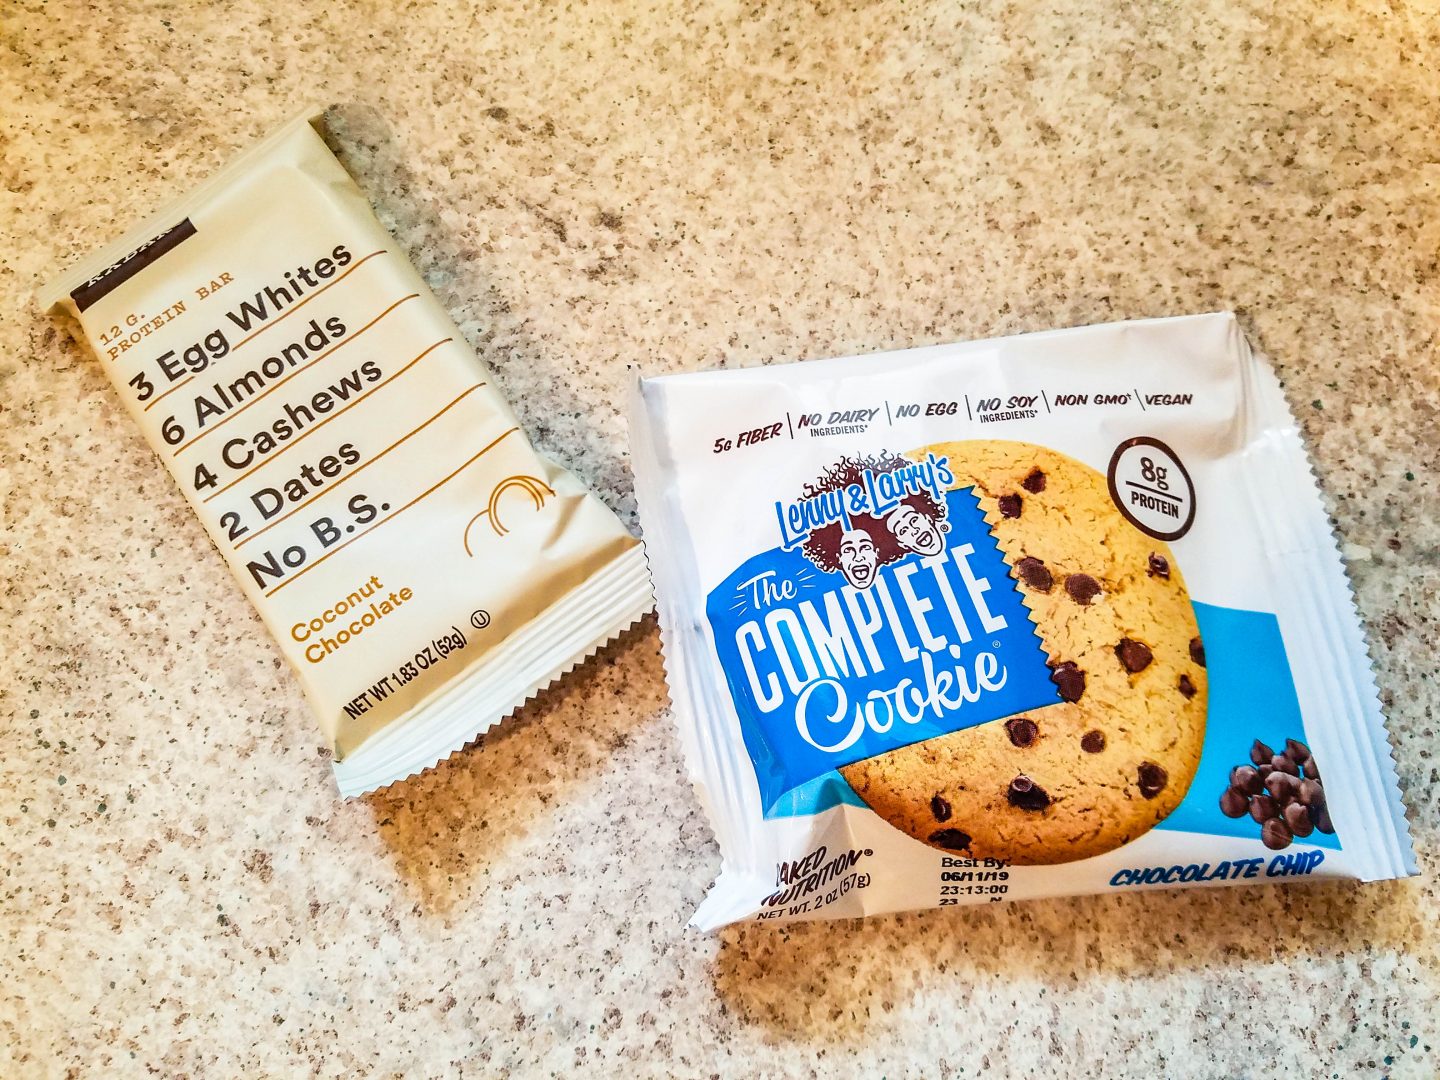 I just can’t say enough about these dried mango slices. Like the frozen banana bites, they’re my go-to snack if I want something sweet but (kind of??) healthy. I’m also a big fan of chocolate-covered espresso beans. I think I’ll pack a few of these to take to work when that mid-afternoon slump hits.